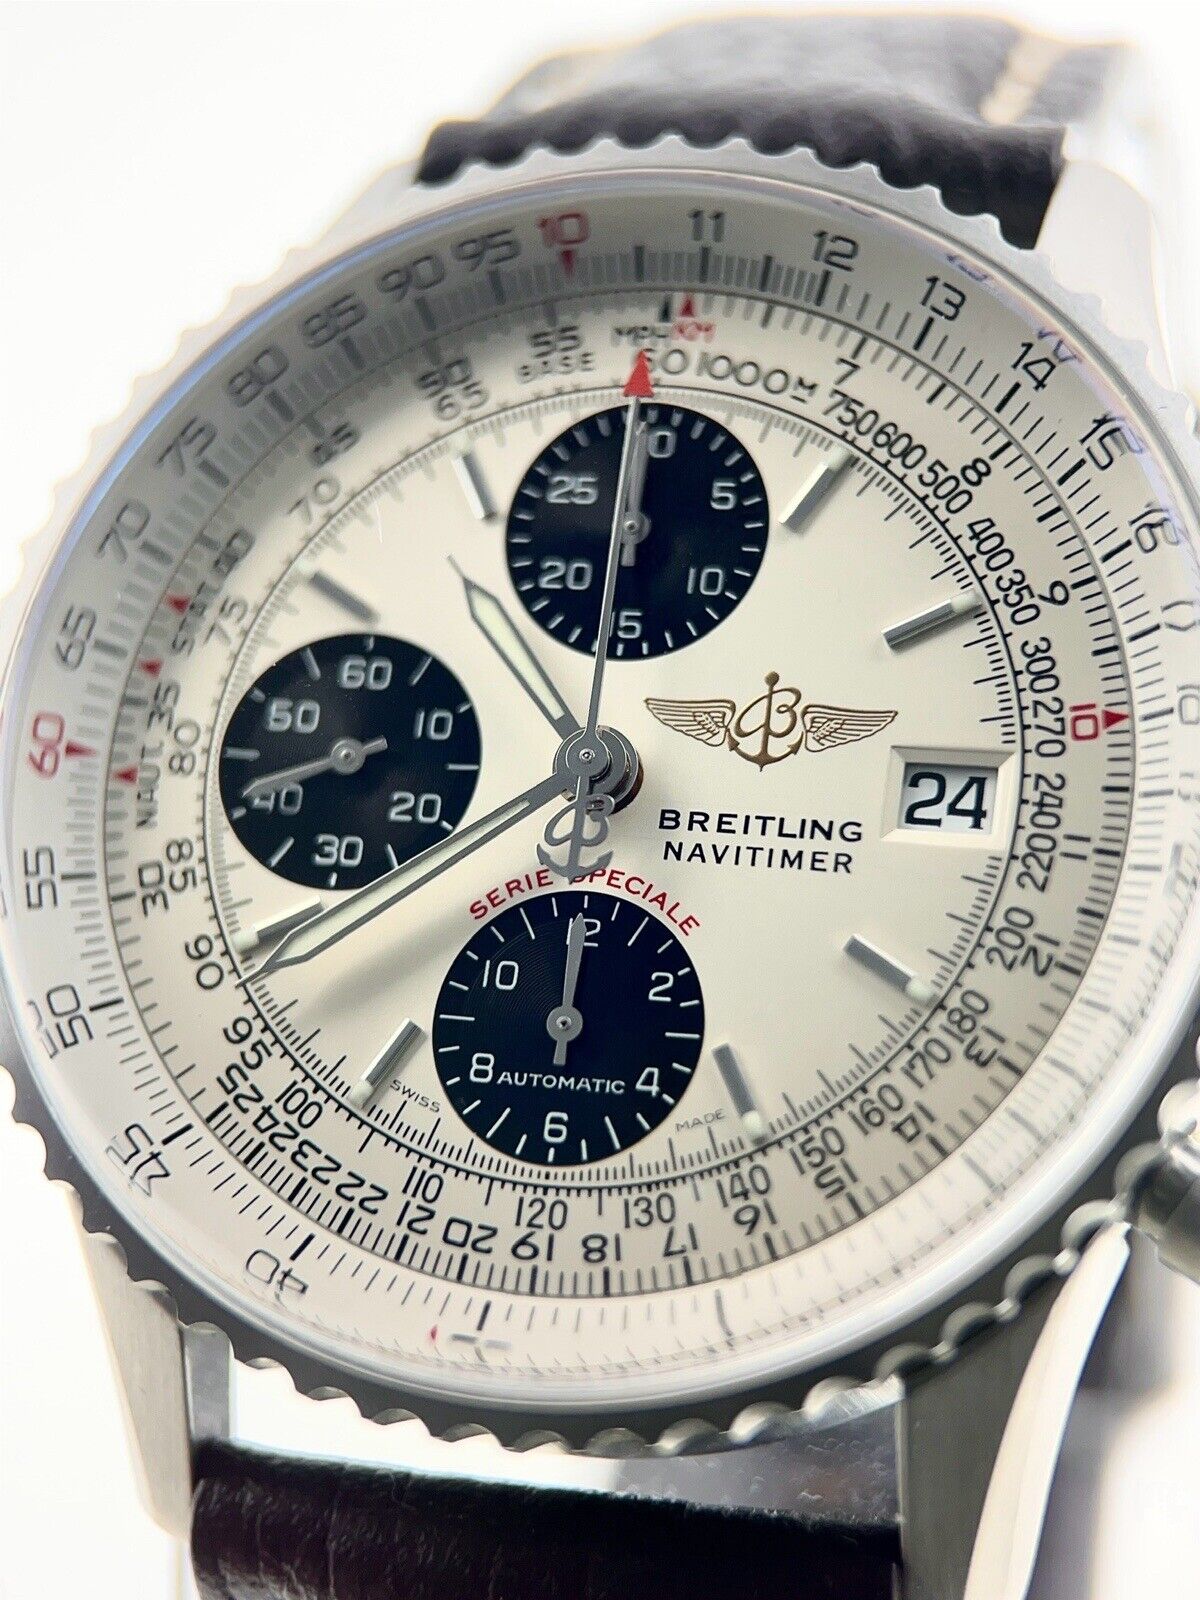 Breitling Navitimer Chrono Stainless Steel 42mm Automatic Men’s Watch A13330